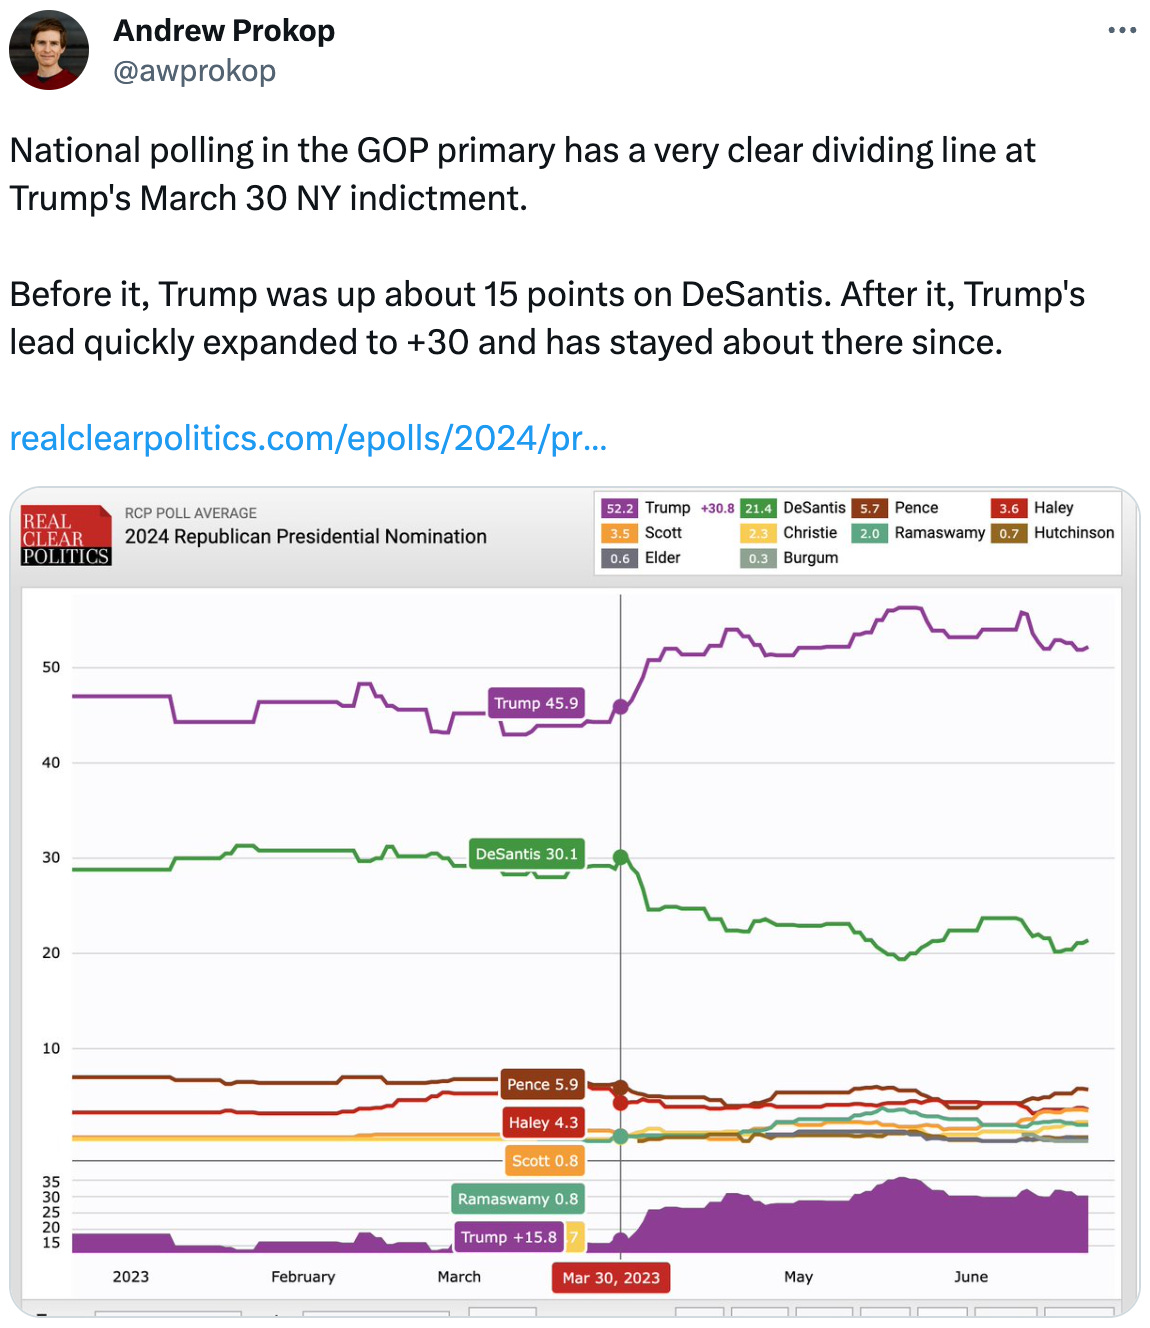  See new Tweets Conversation Andrew Prokop @awprokop National polling in the GOP primary has a very clear dividing line at Trump's March 30 NY indictment.  Before it, Trump was up about 15 points on DeSantis. After it, Trump's lead quickly expanded to +30 and has stayed about there since.  https://realclearpolitics.com/epolls/2024/president/us/2024_republican_presidential_nomination-7548.html